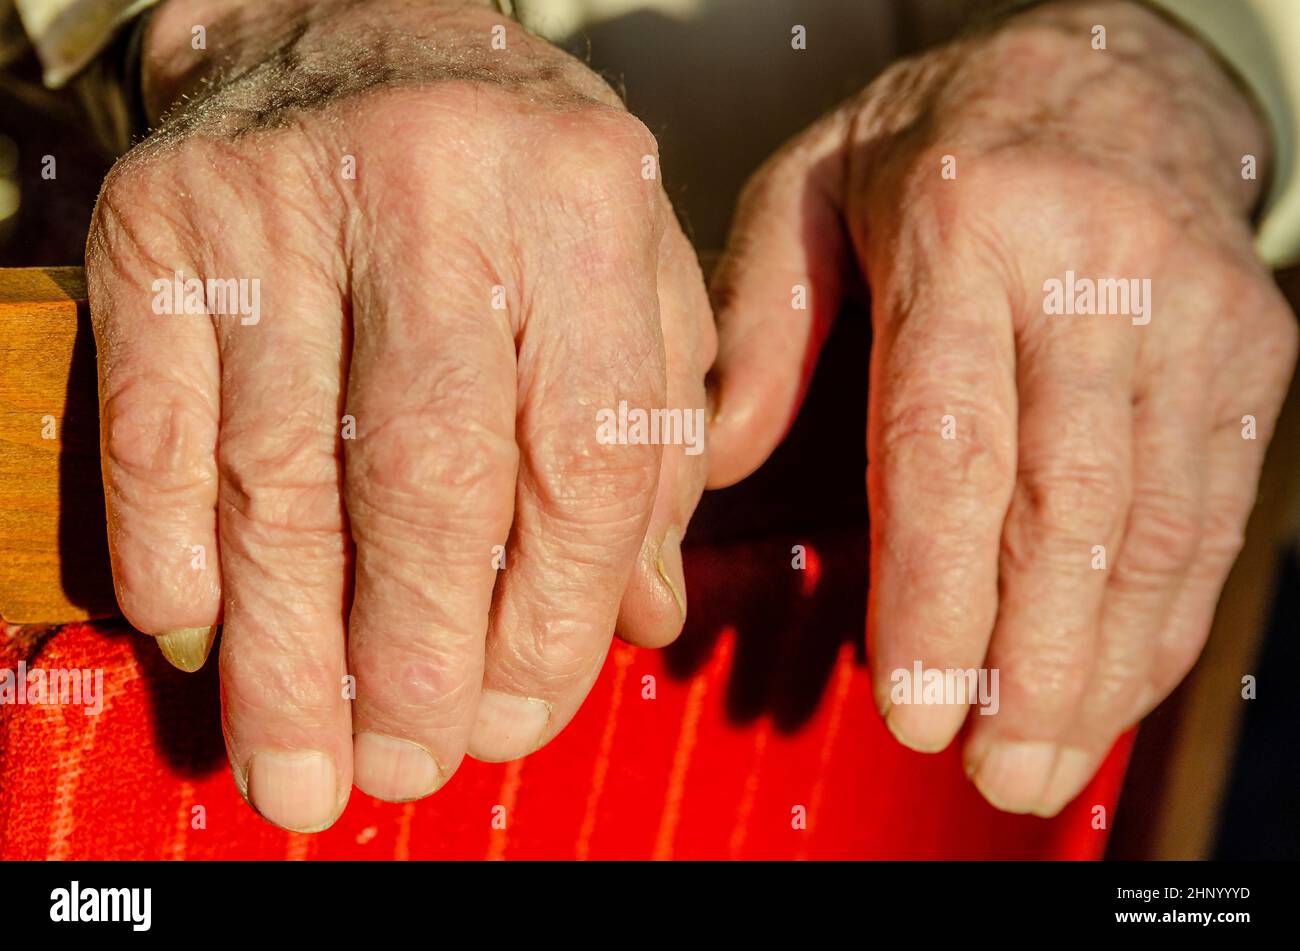 hands of the old man on a background Stock Photo